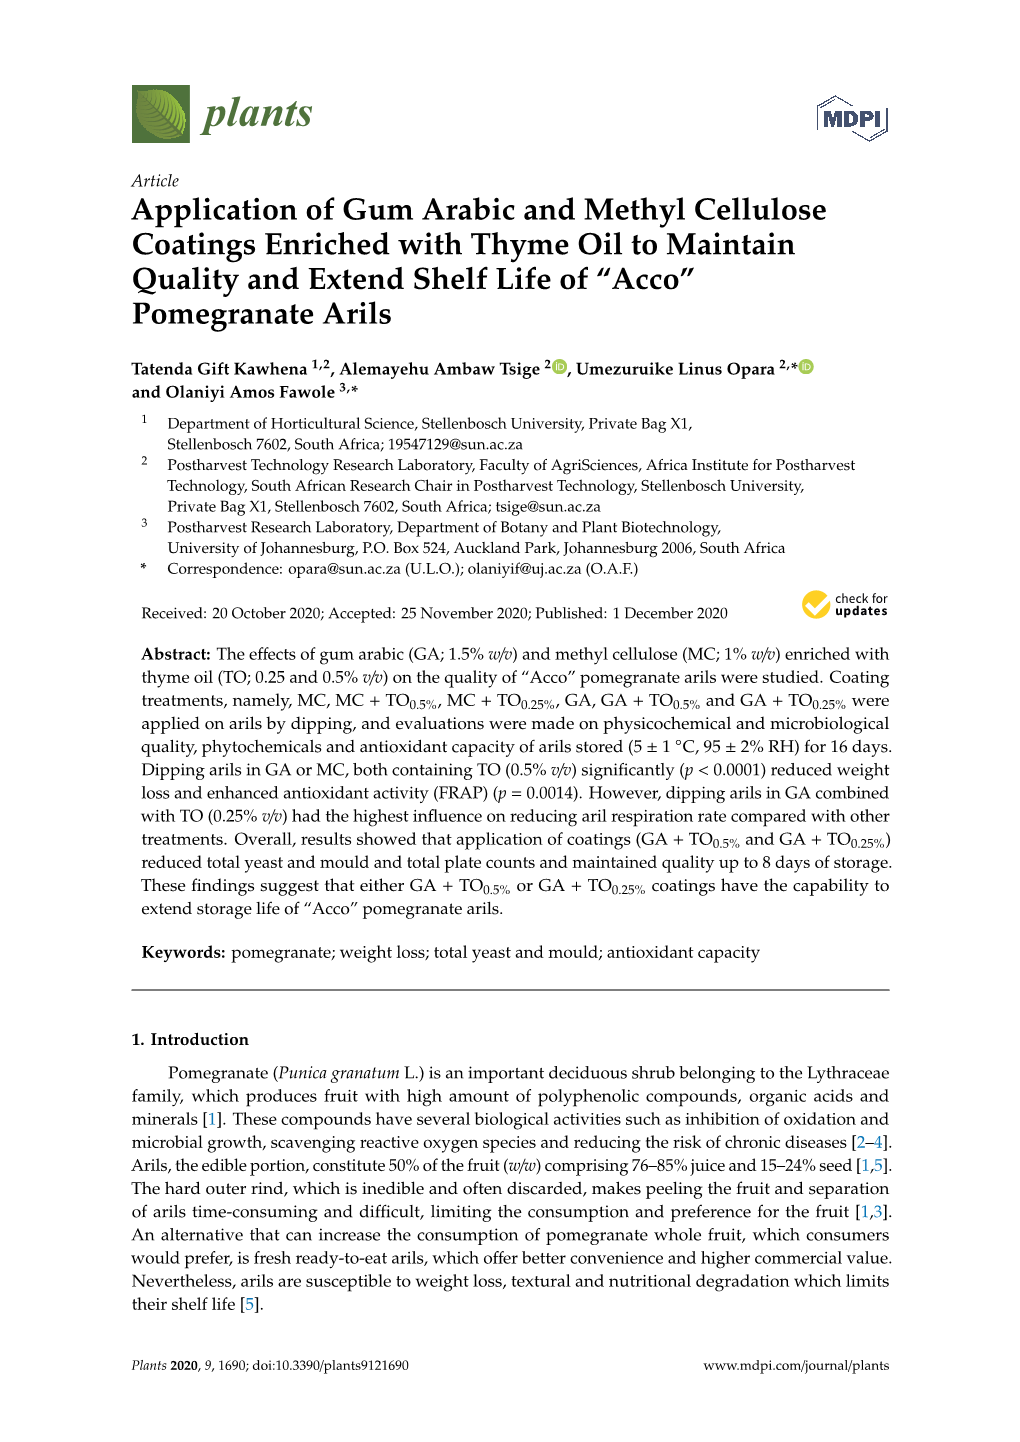 Application of Gum Arabic and Methyl Cellulose Coatings Enriched with Thyme Oil to Maintain Quality and Extend Shelf Life of “Acco” Pomegranate Arils